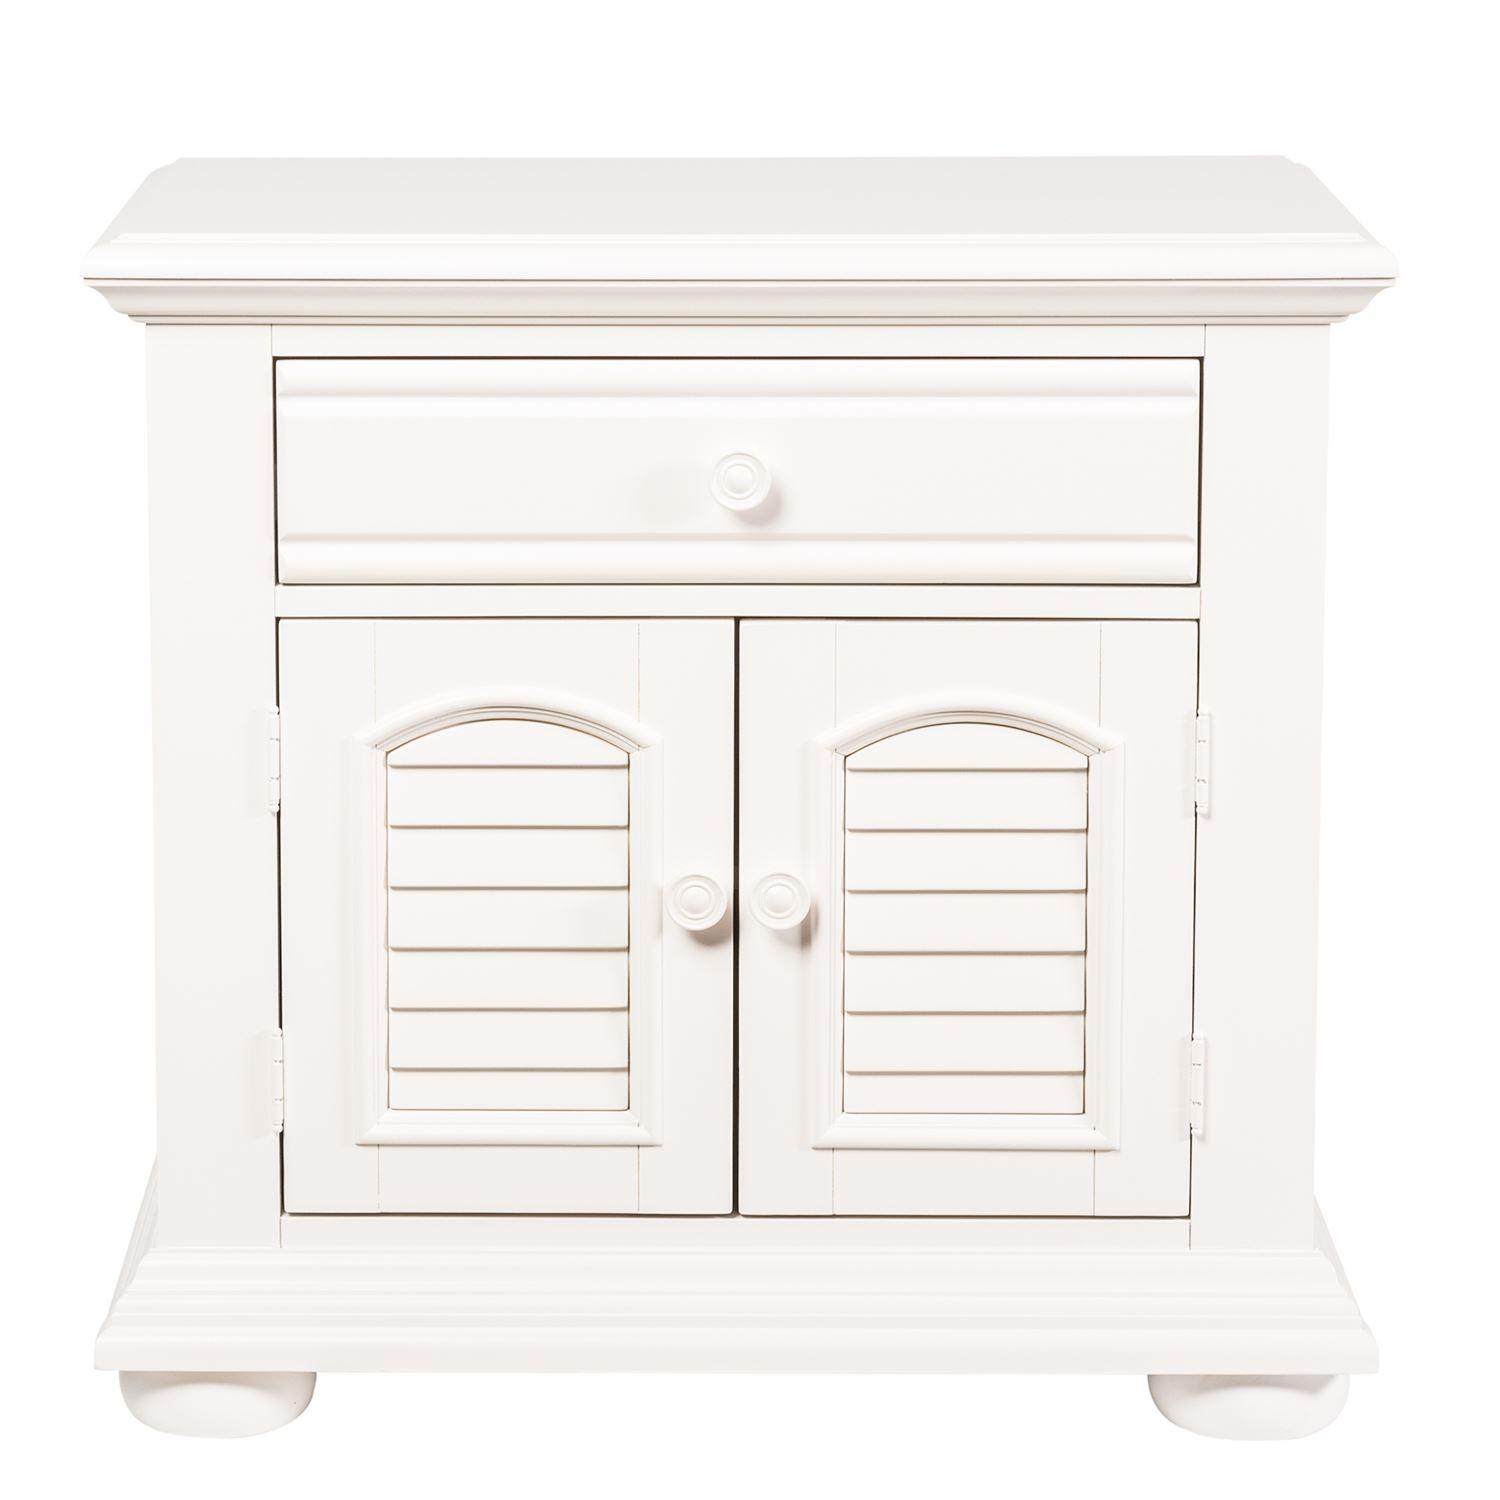 Cottage Nightstand Summer House I  (607-BR) Nightstand 607-BR61 in White 